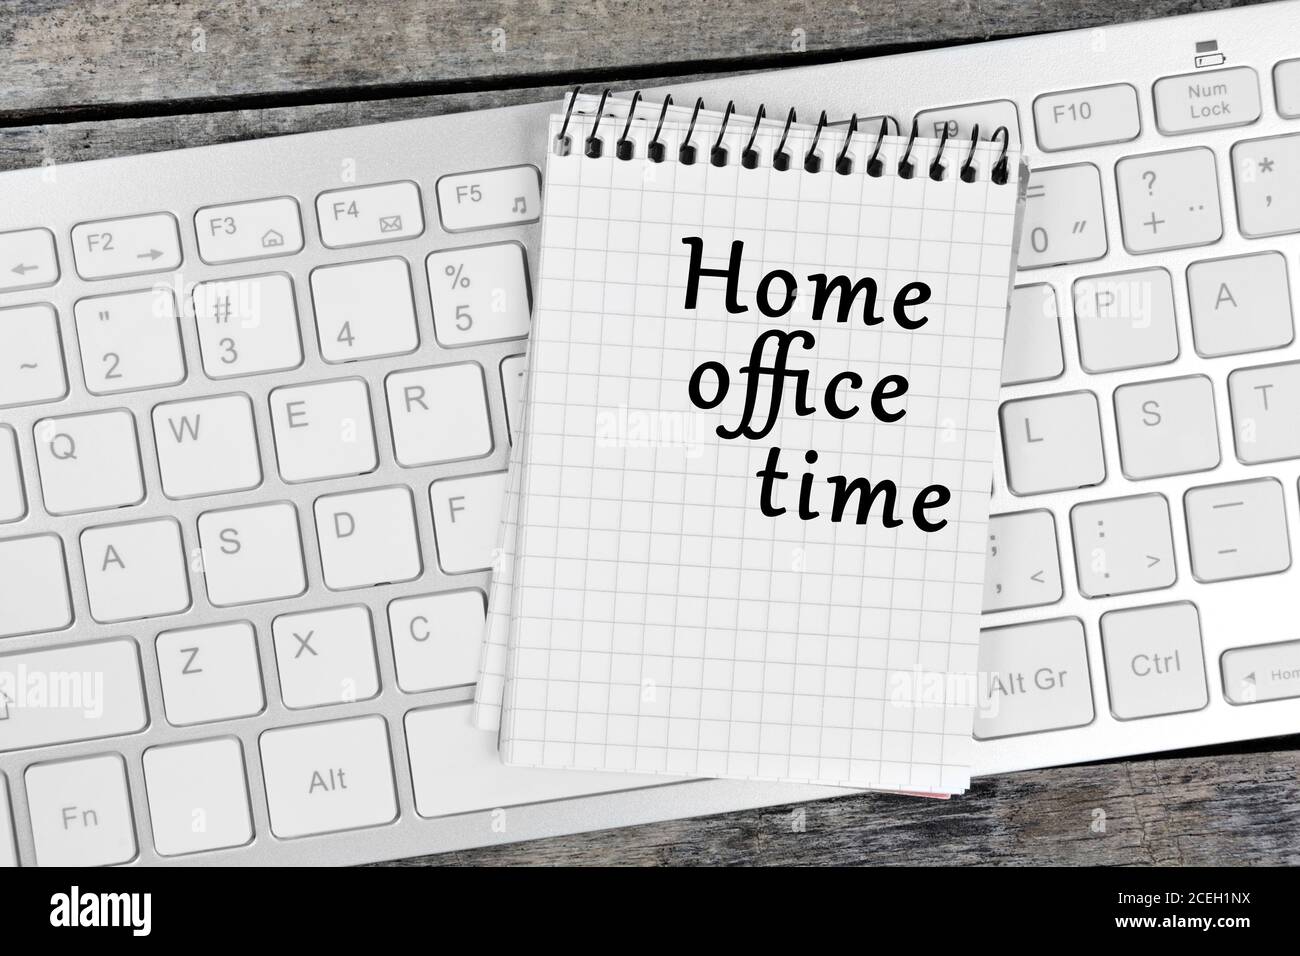 Home office time word on notebook page Stock Photo